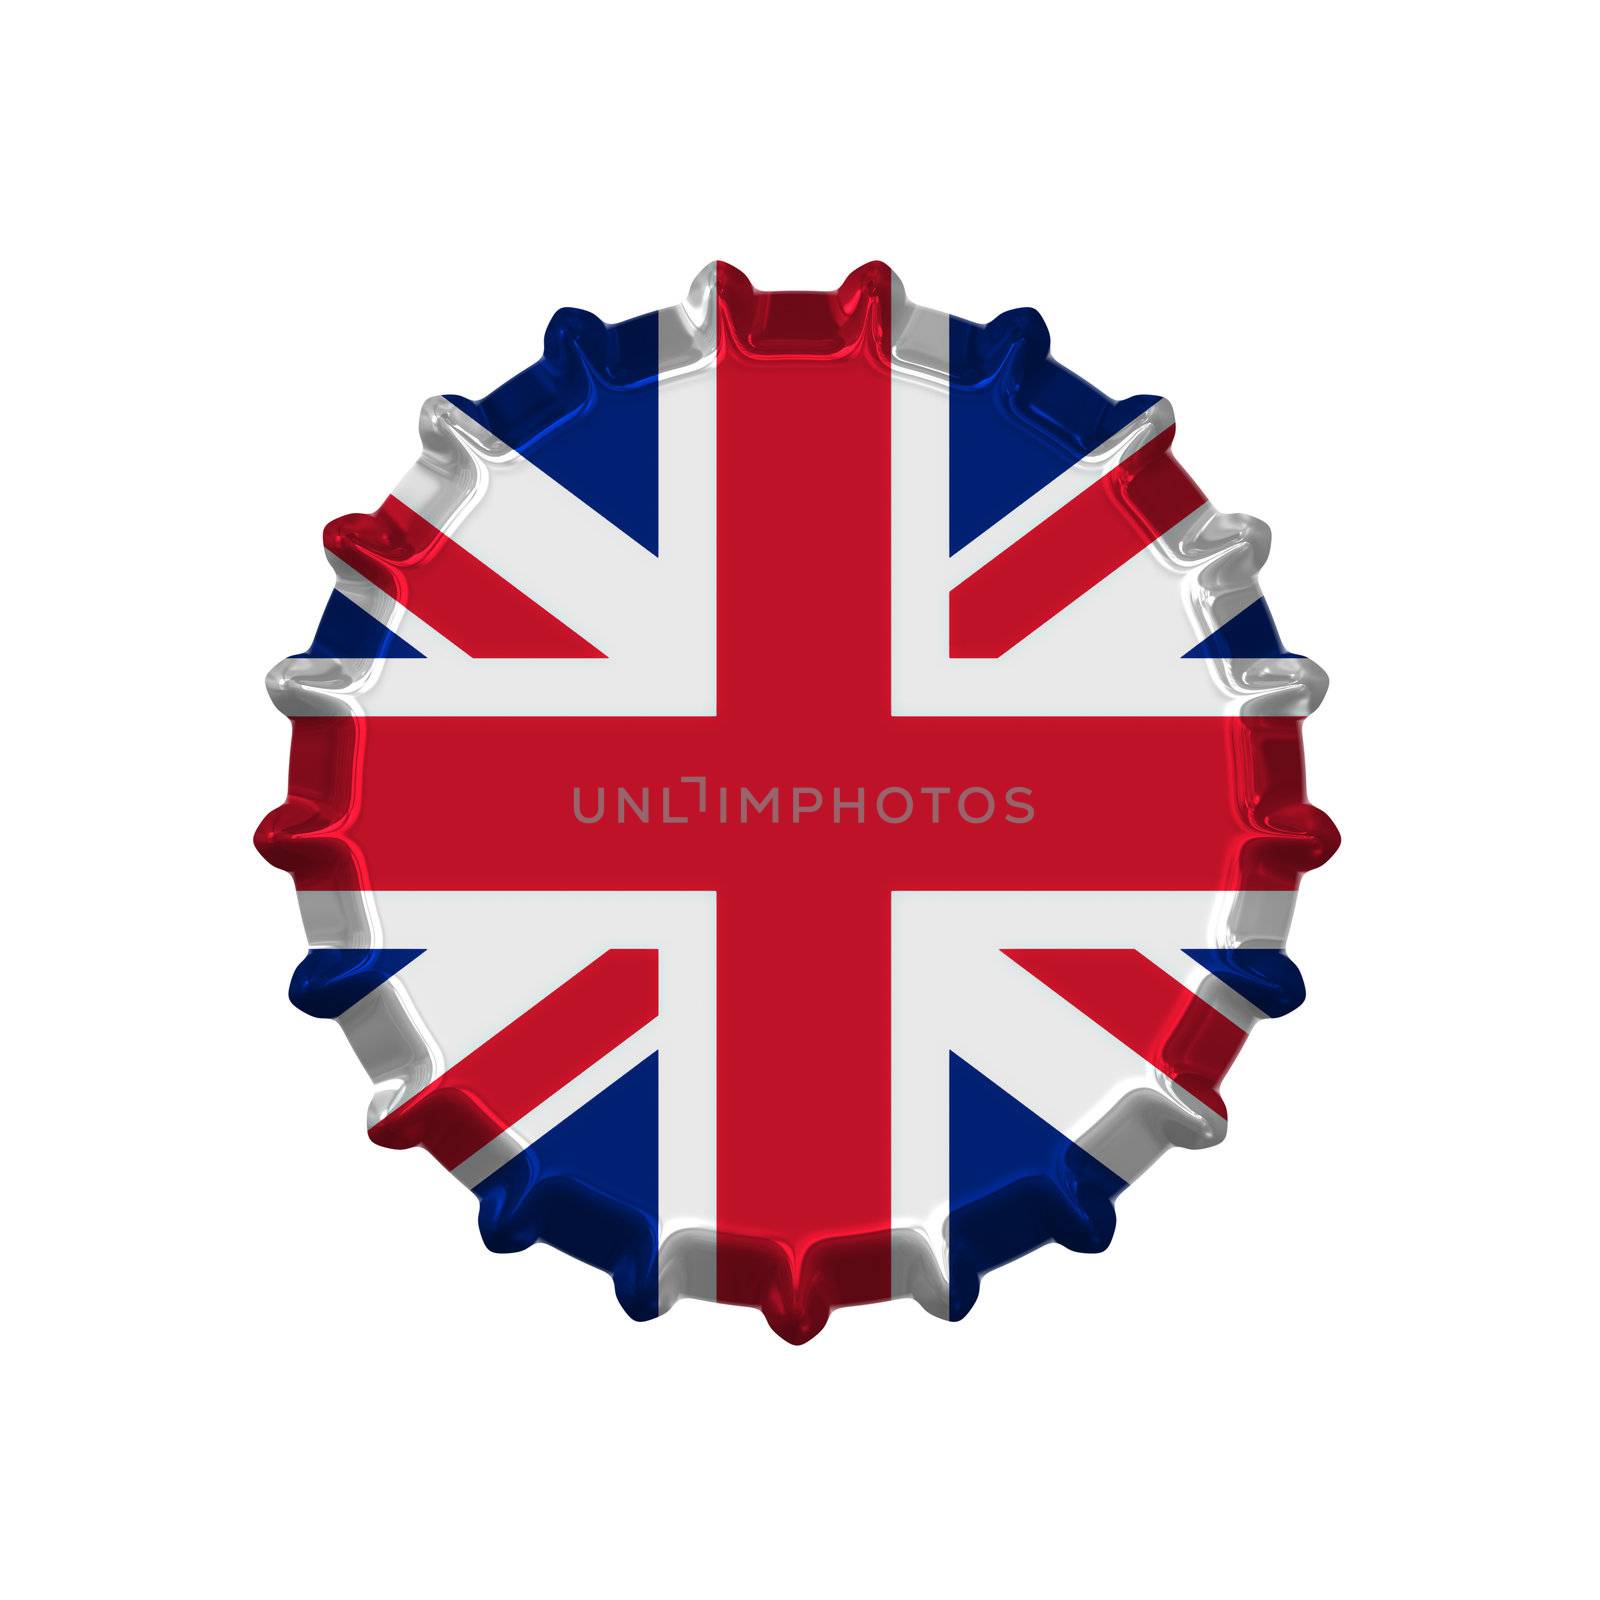 An illustration of a bottle cap with a country sign united kingdom